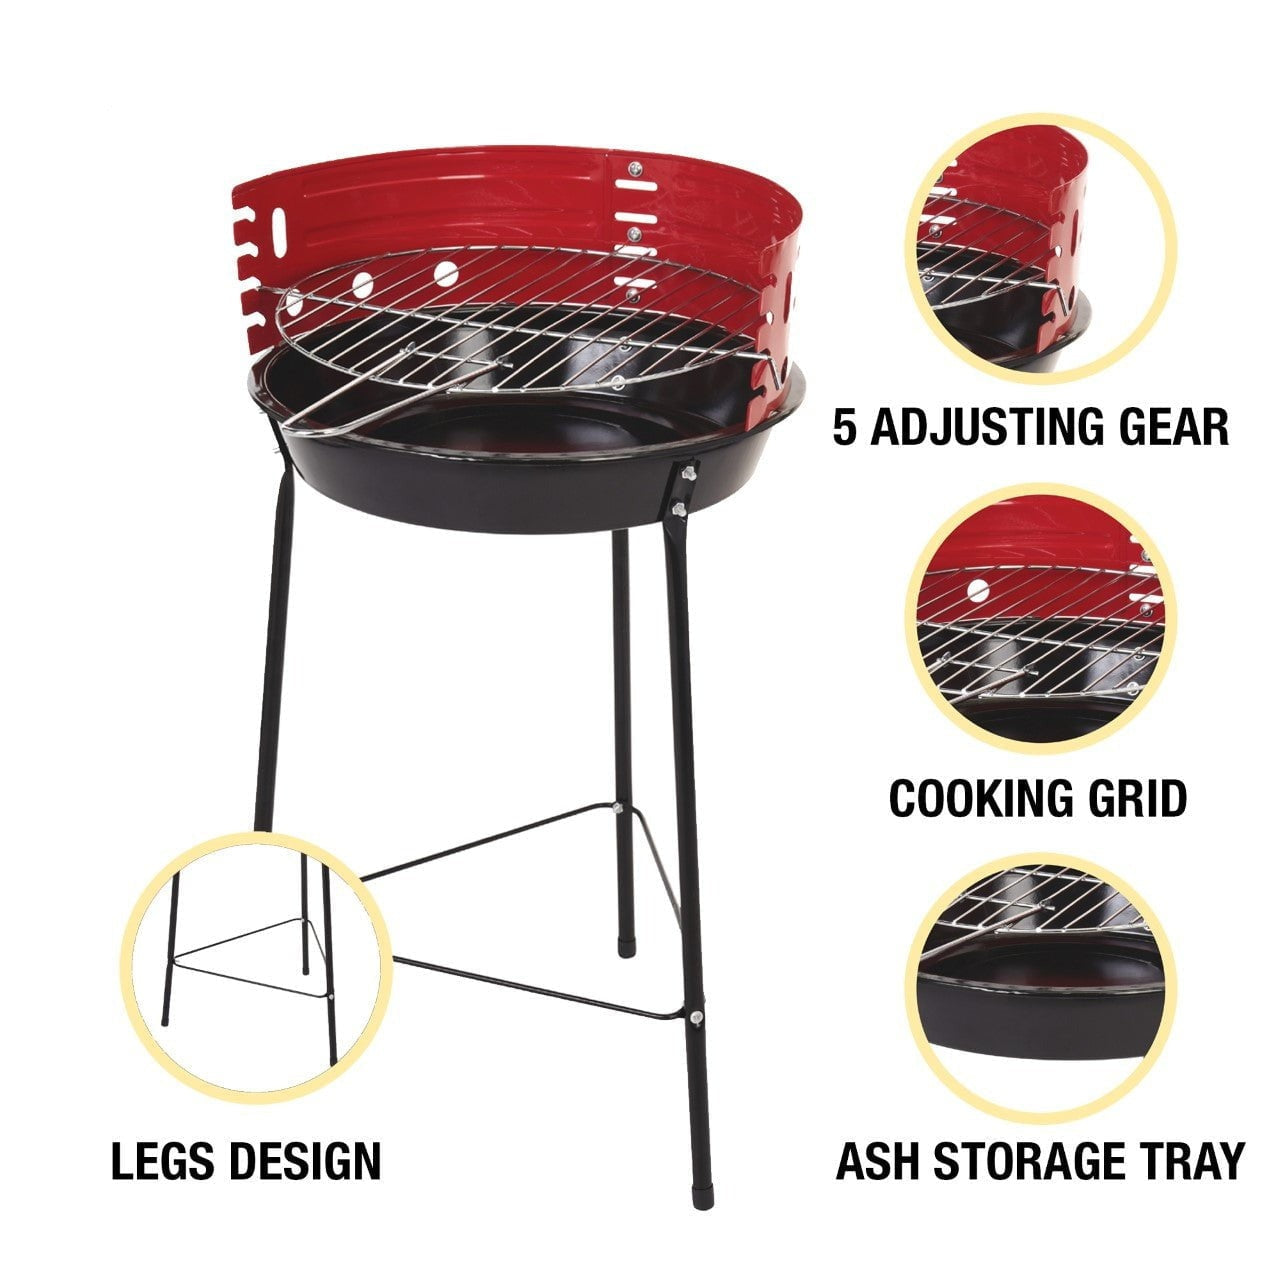 Portable Round BBQ Grill 4 Adjustable Grilling Levels 1161 (Big Parcel Rate)